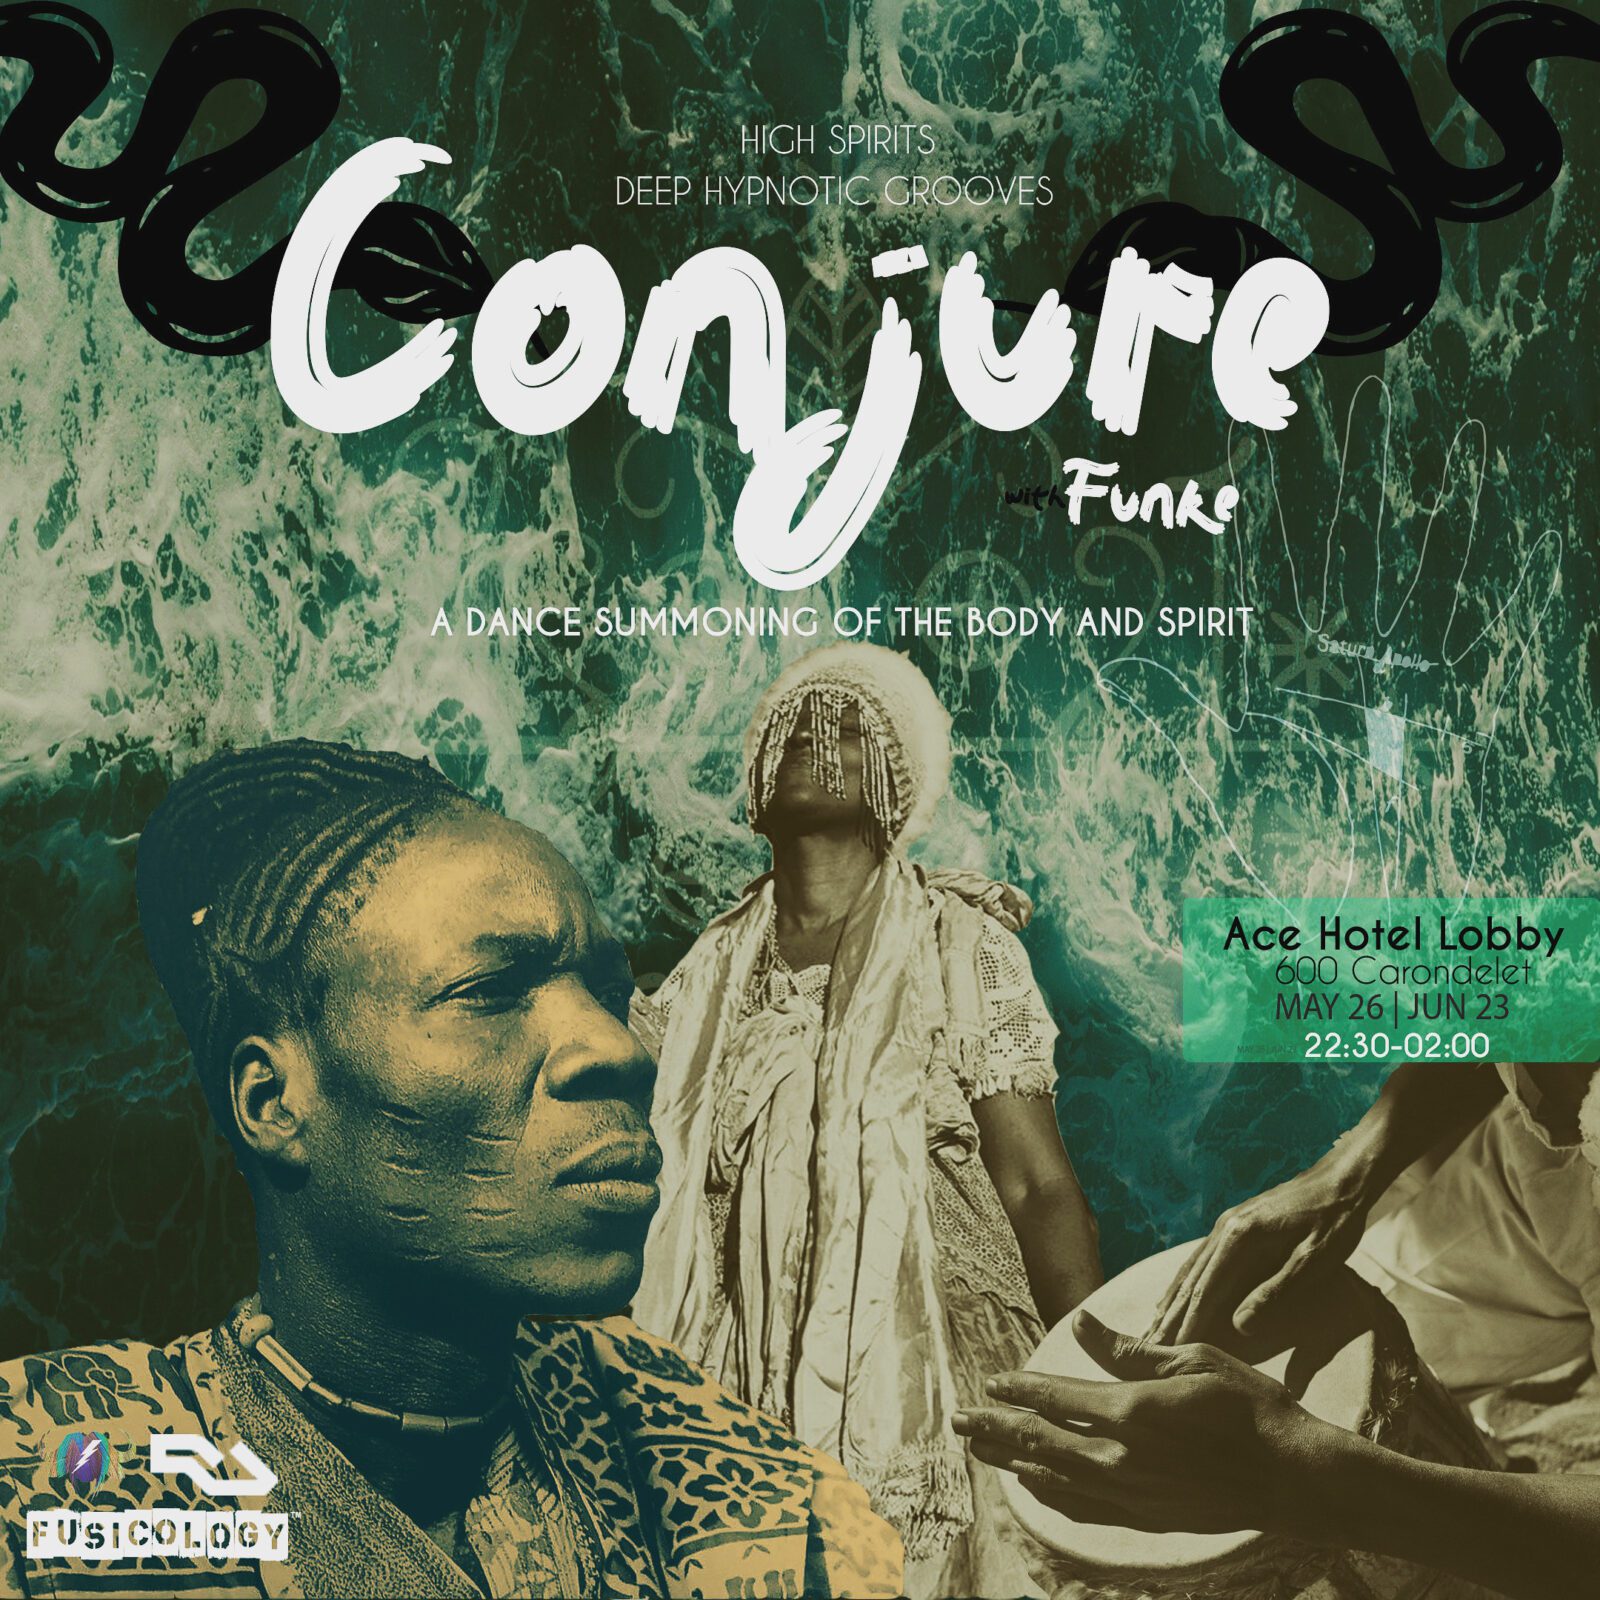 Conjure Funke - Ace New Orleans Lobby May 26 and June 23